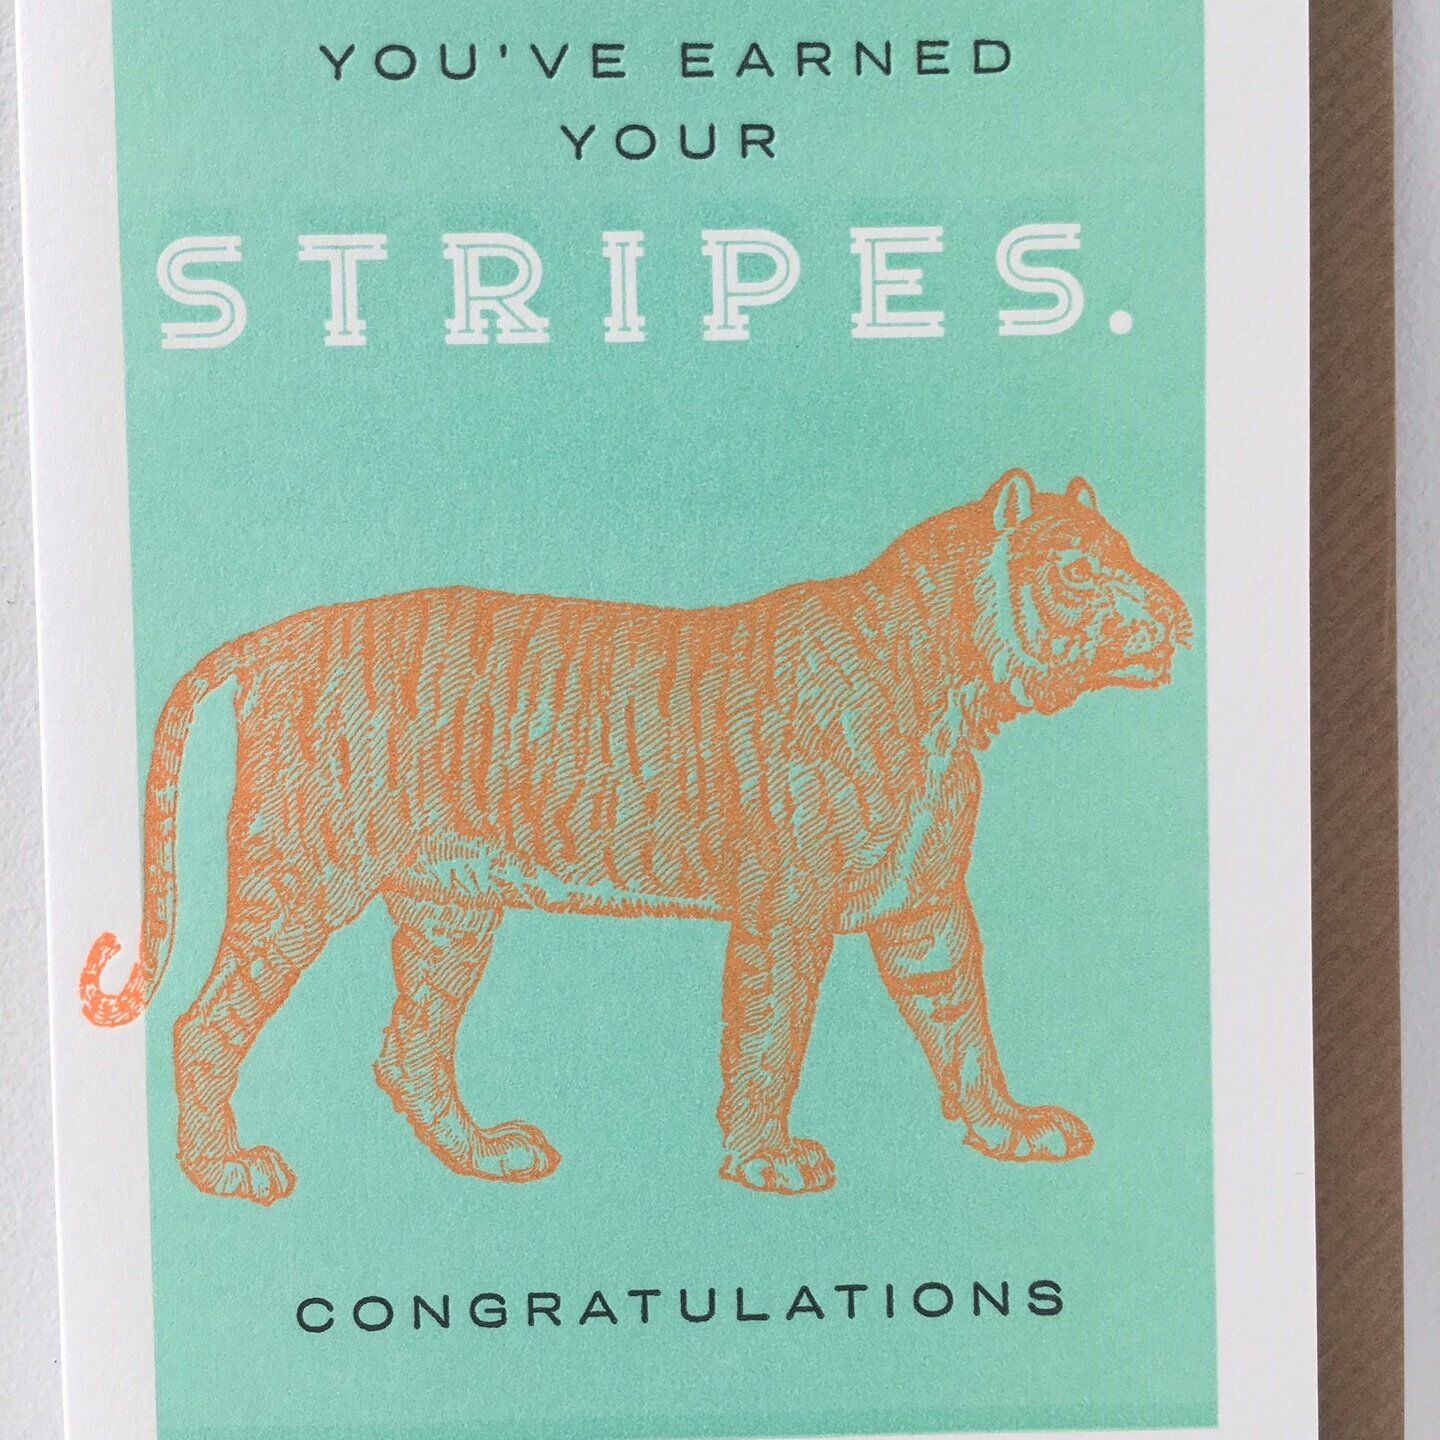 Card (Archivist Gallery): You've Earned Your Stripes